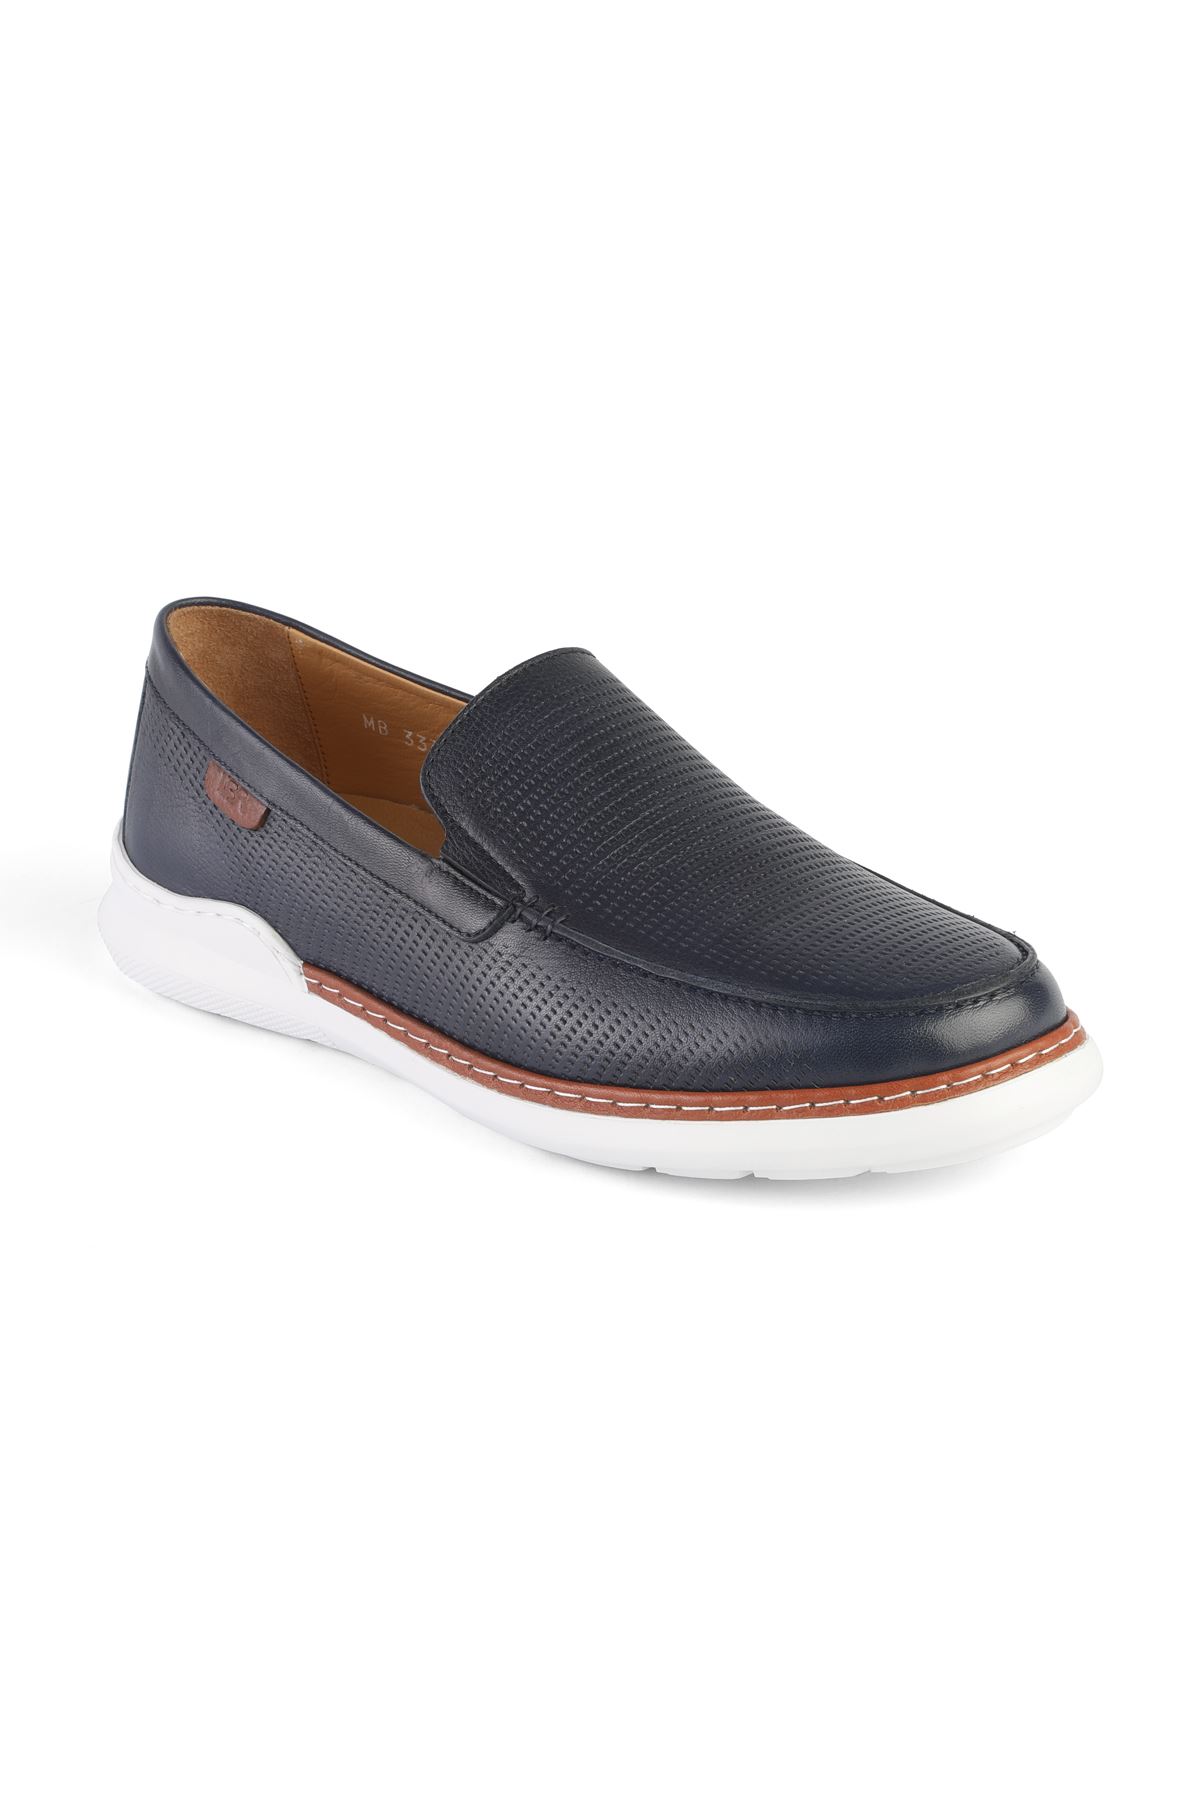 Libero 3332 Navy Blue Loafer Shoes